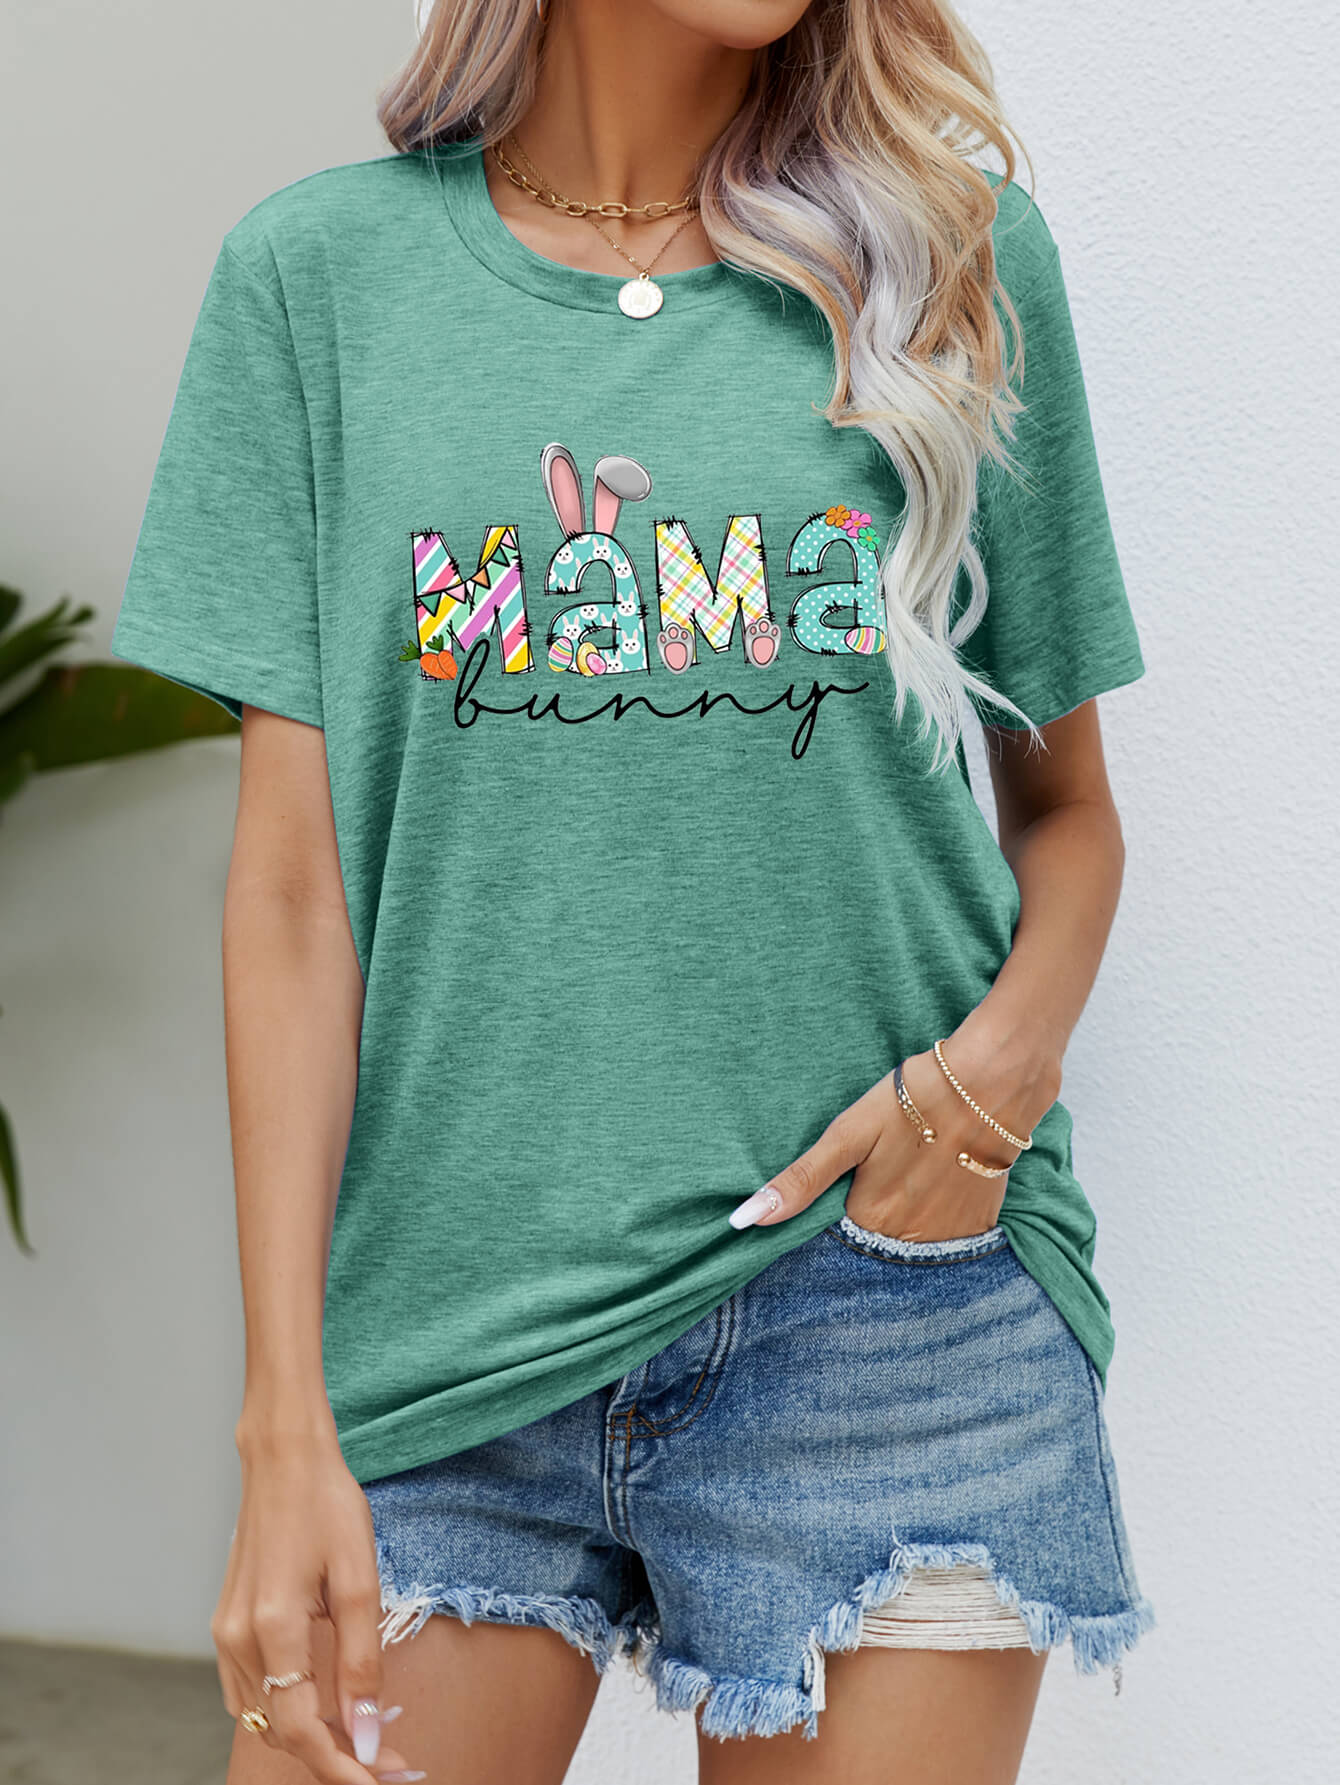 MAMA BUNNY Easter Graphic Tee (6 Colors)  Krazy Heart Designs Boutique Gum Leaf S 